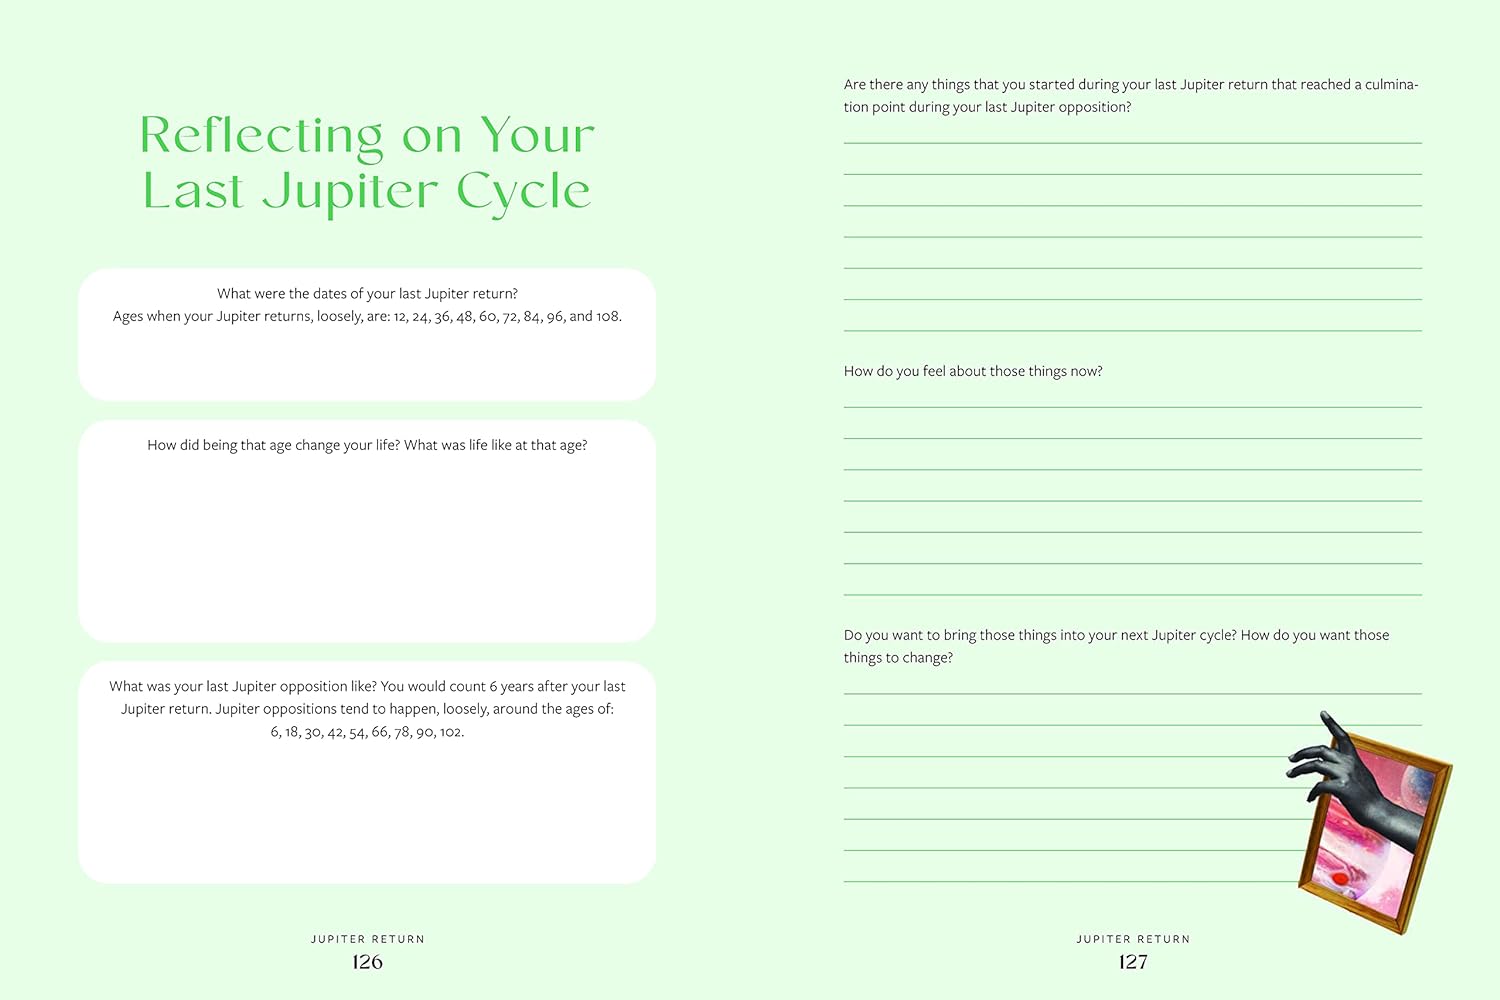 Aligning Your Planets: An Astrological Journal for Self-Reflection, Growth, and Balance